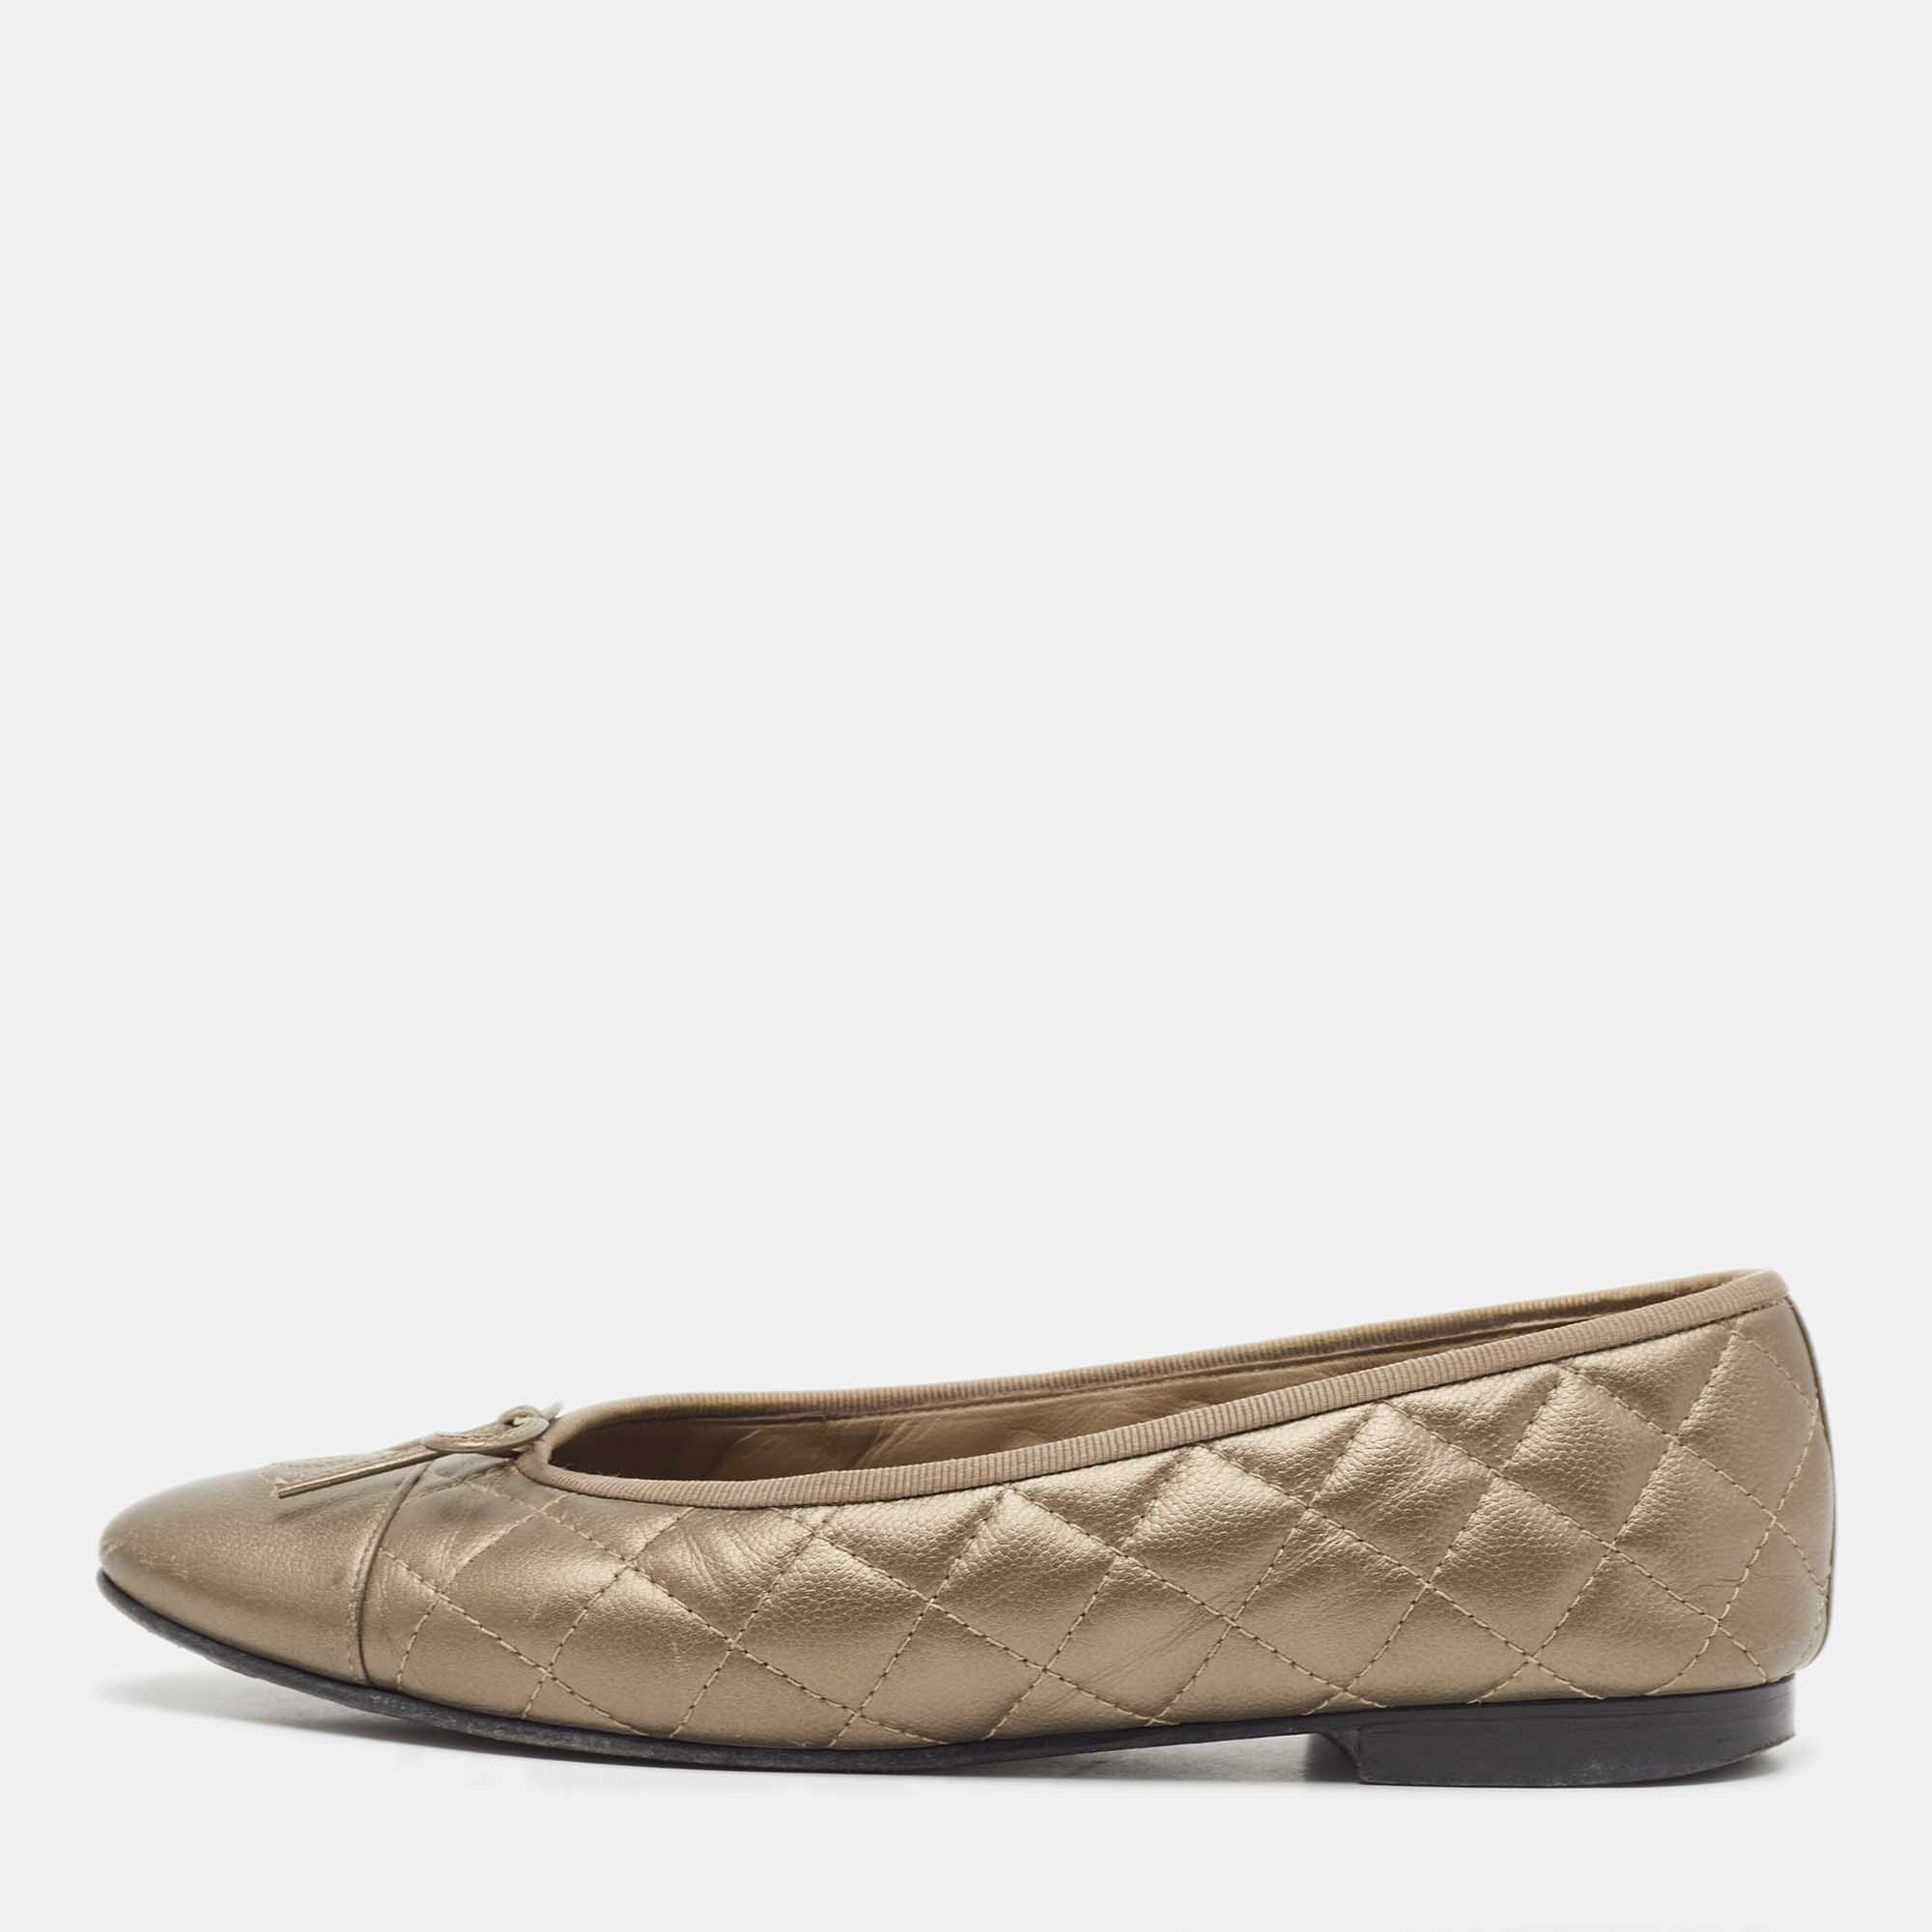 

Chanel Metallic Quilted Leather Bow CC Cap Toe Ballet Flats Size